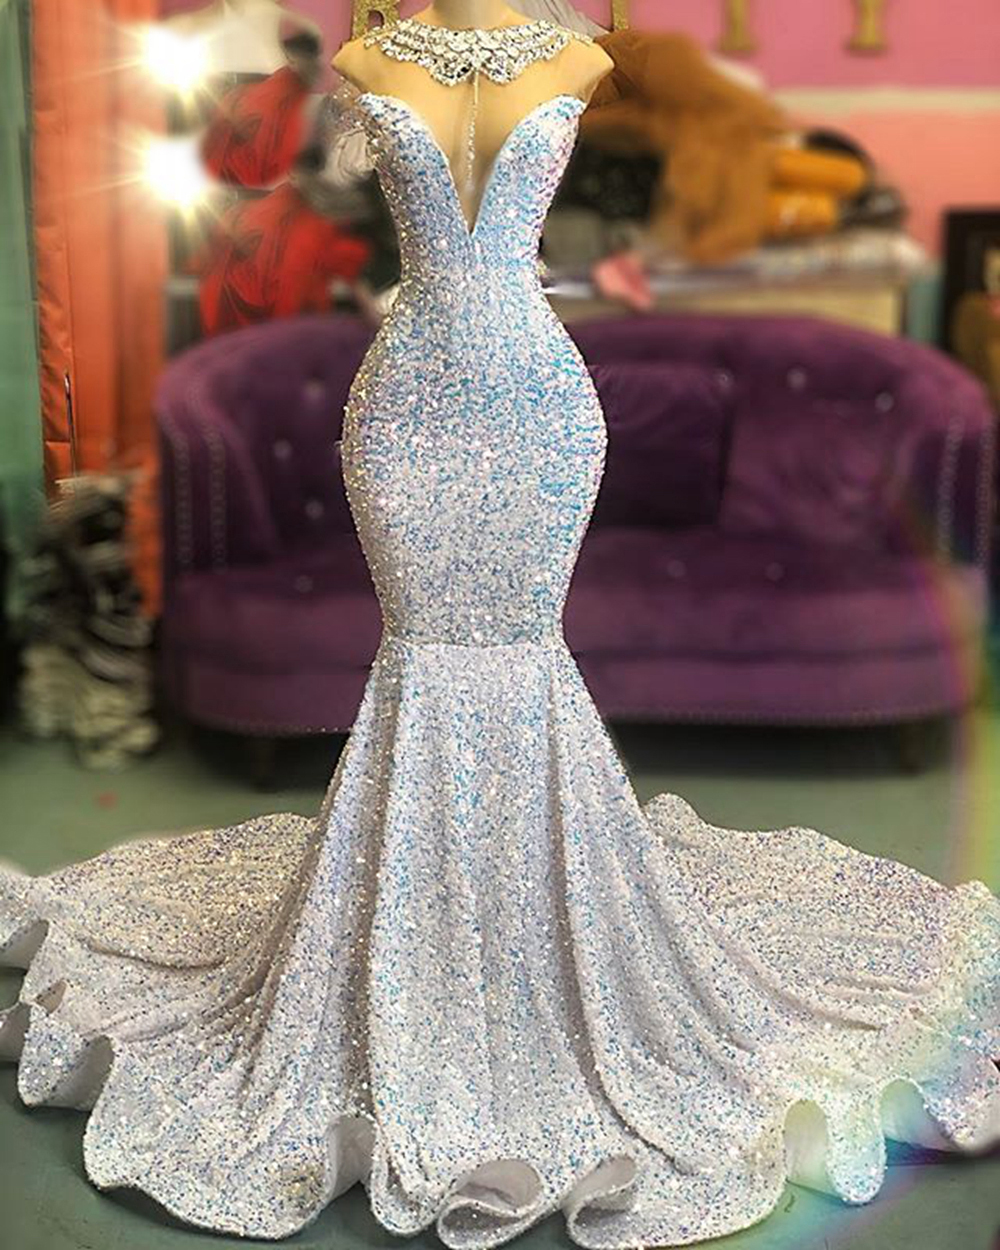 White Prom Dresses, Sweetheart Prom Dresses, Sparkly Prom Dresses, Shinning Prom Dresses, Custom Make Evening Dresses, Evening Gowns, Fashion